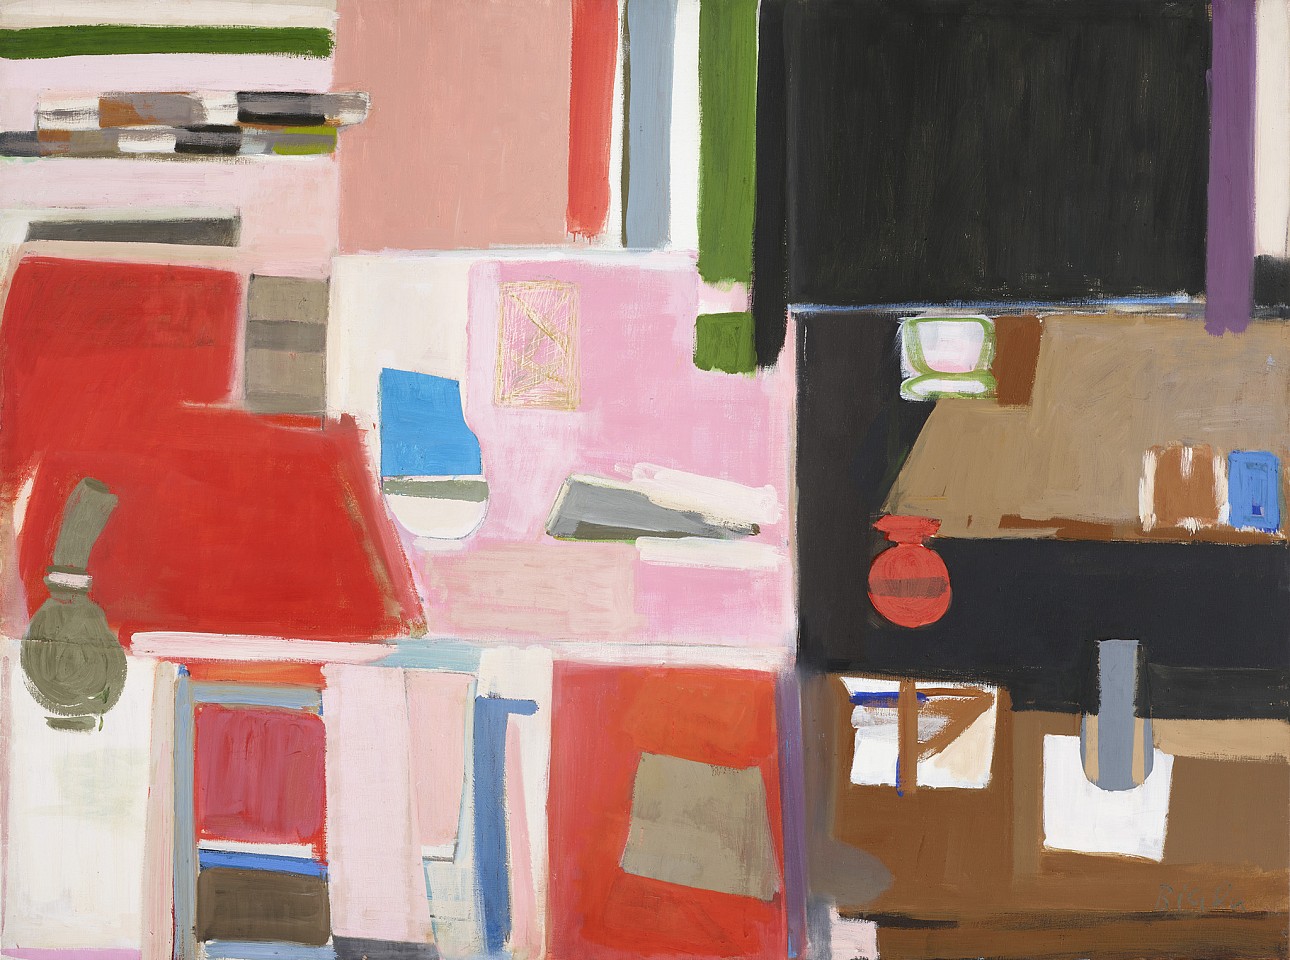 Janice Biala, Nature Morte Rose, Rouge et Noire, 1977
Oil and acrylic on canvas, 38 1/4 x 51 in. (97.2 x 129.5 cm)
BIAL-00065